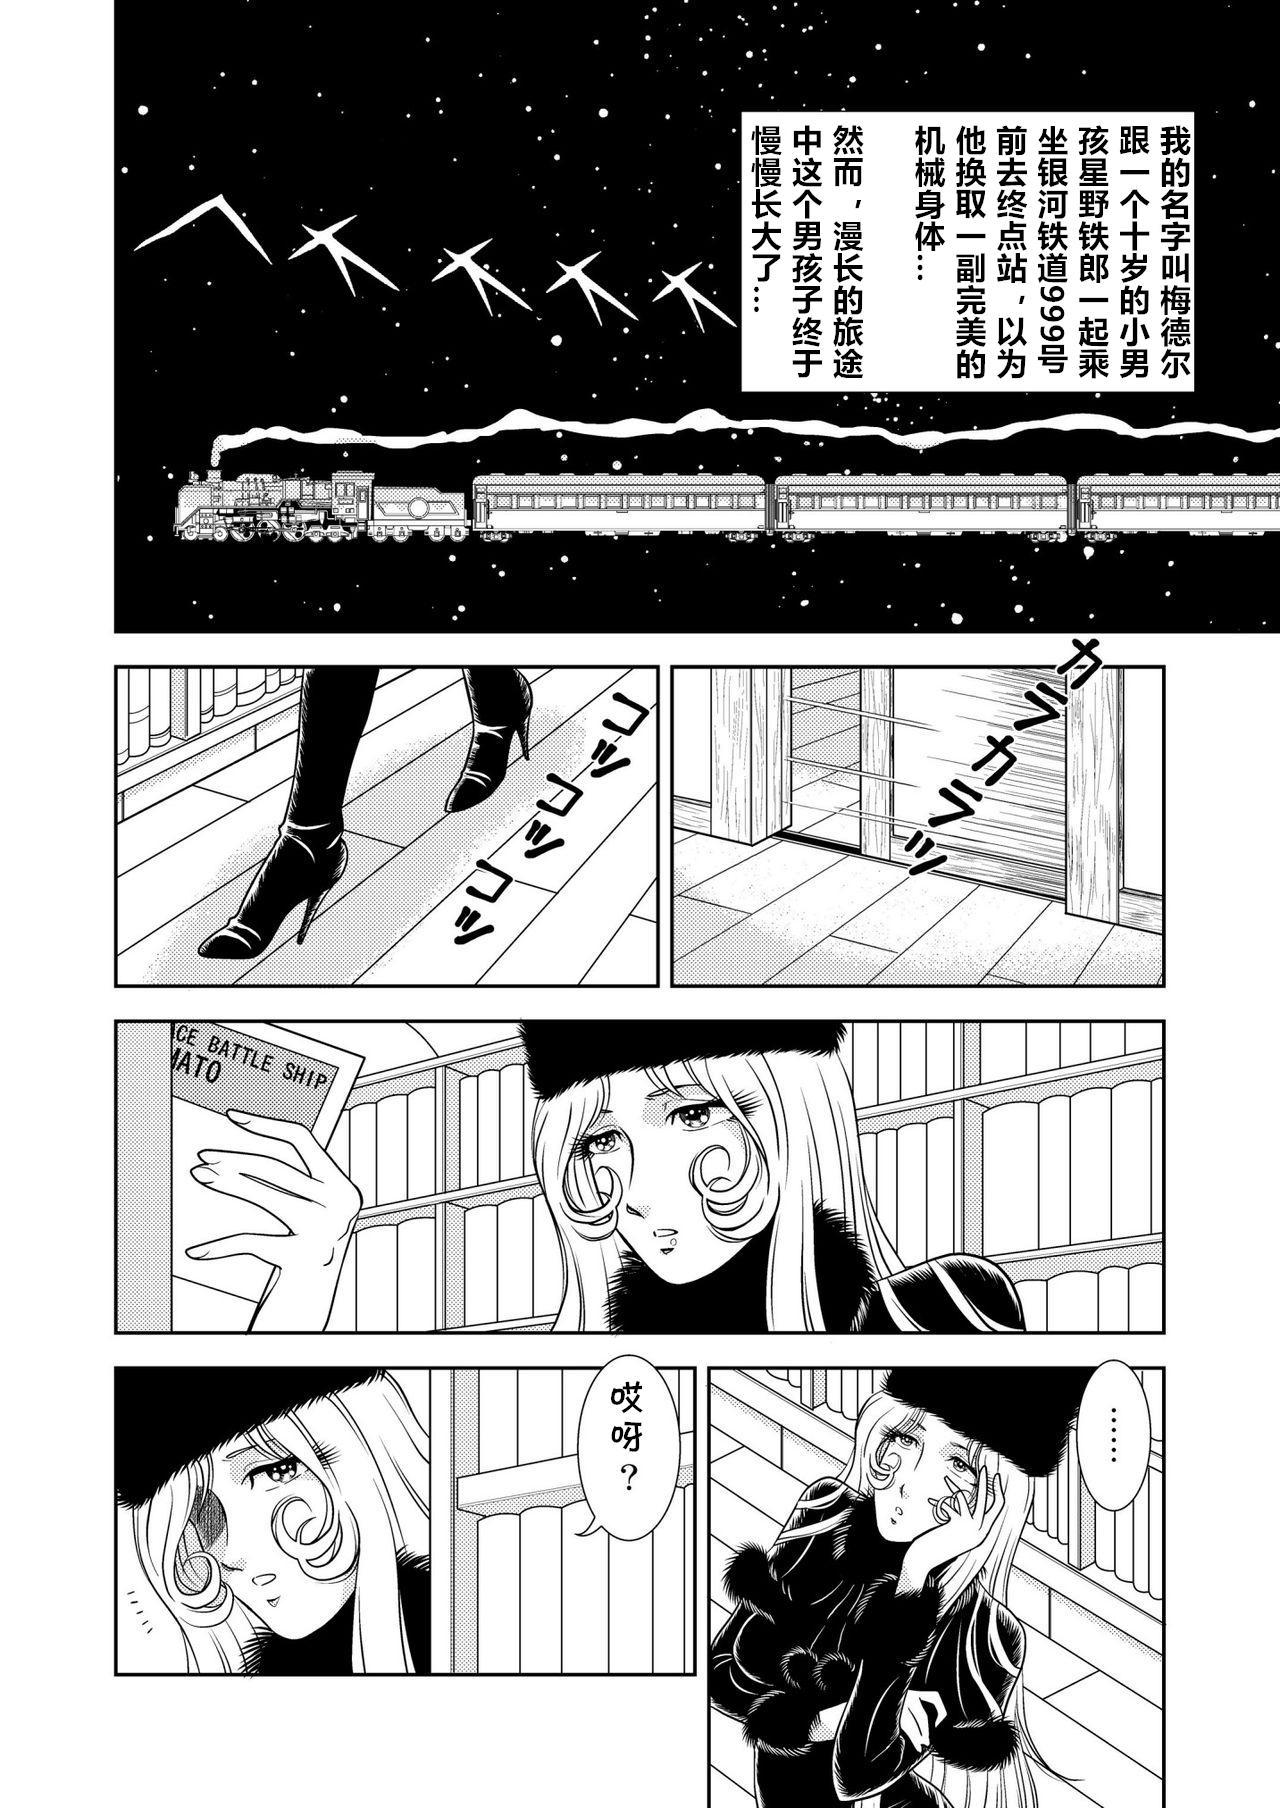 Amateur Porn Free Maetel Story 2 - Galaxy express 999 | ginga tetsudou 999 Onlyfans - Page 2